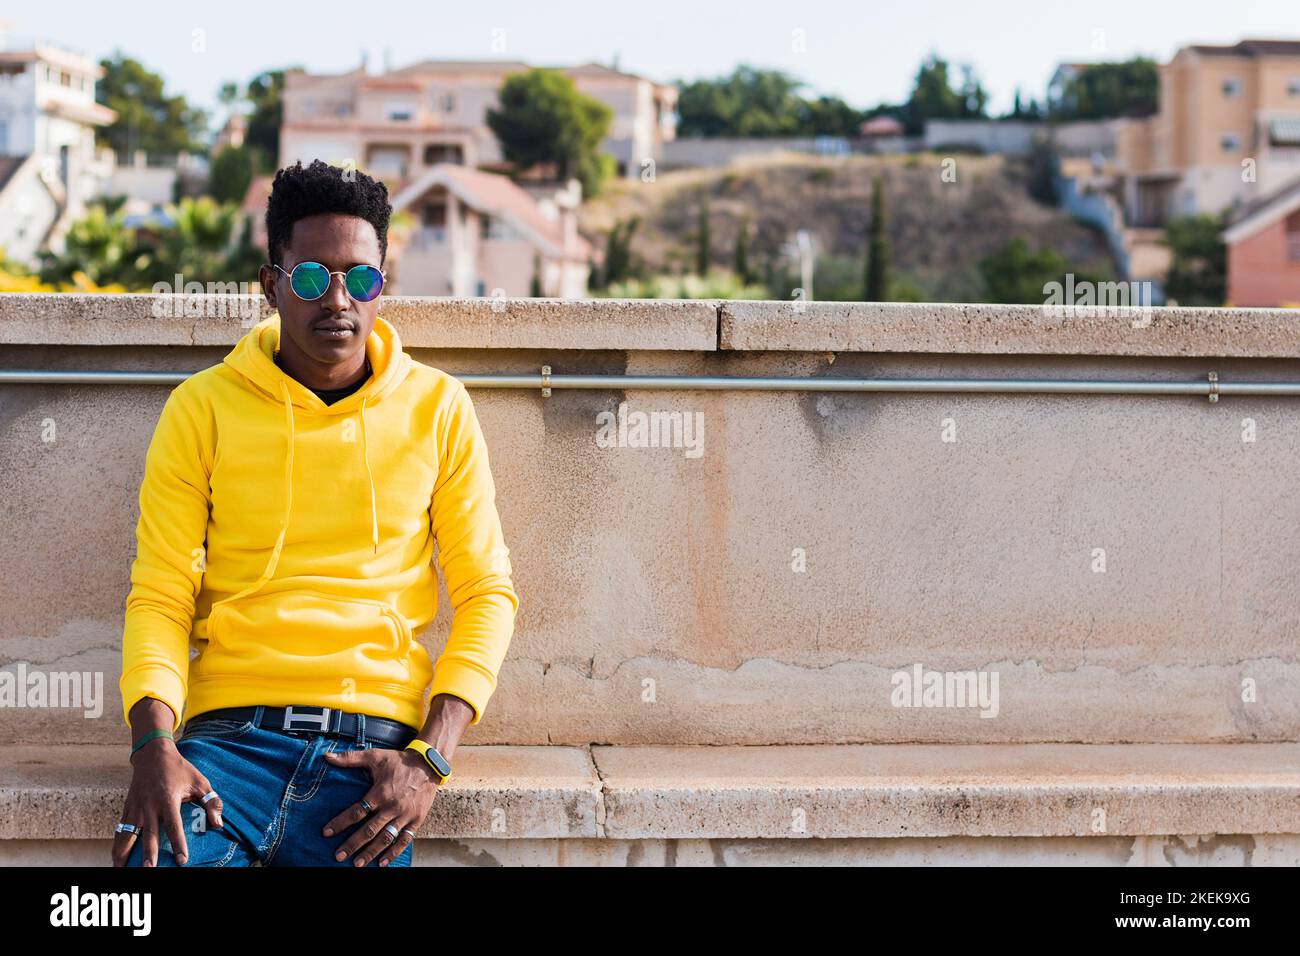 Horizontal plane portrait of a young black man wearing a yellow sweatshirt, blue jeans and glasses leaning against a low wall in the street. Out of fo Stock Photo